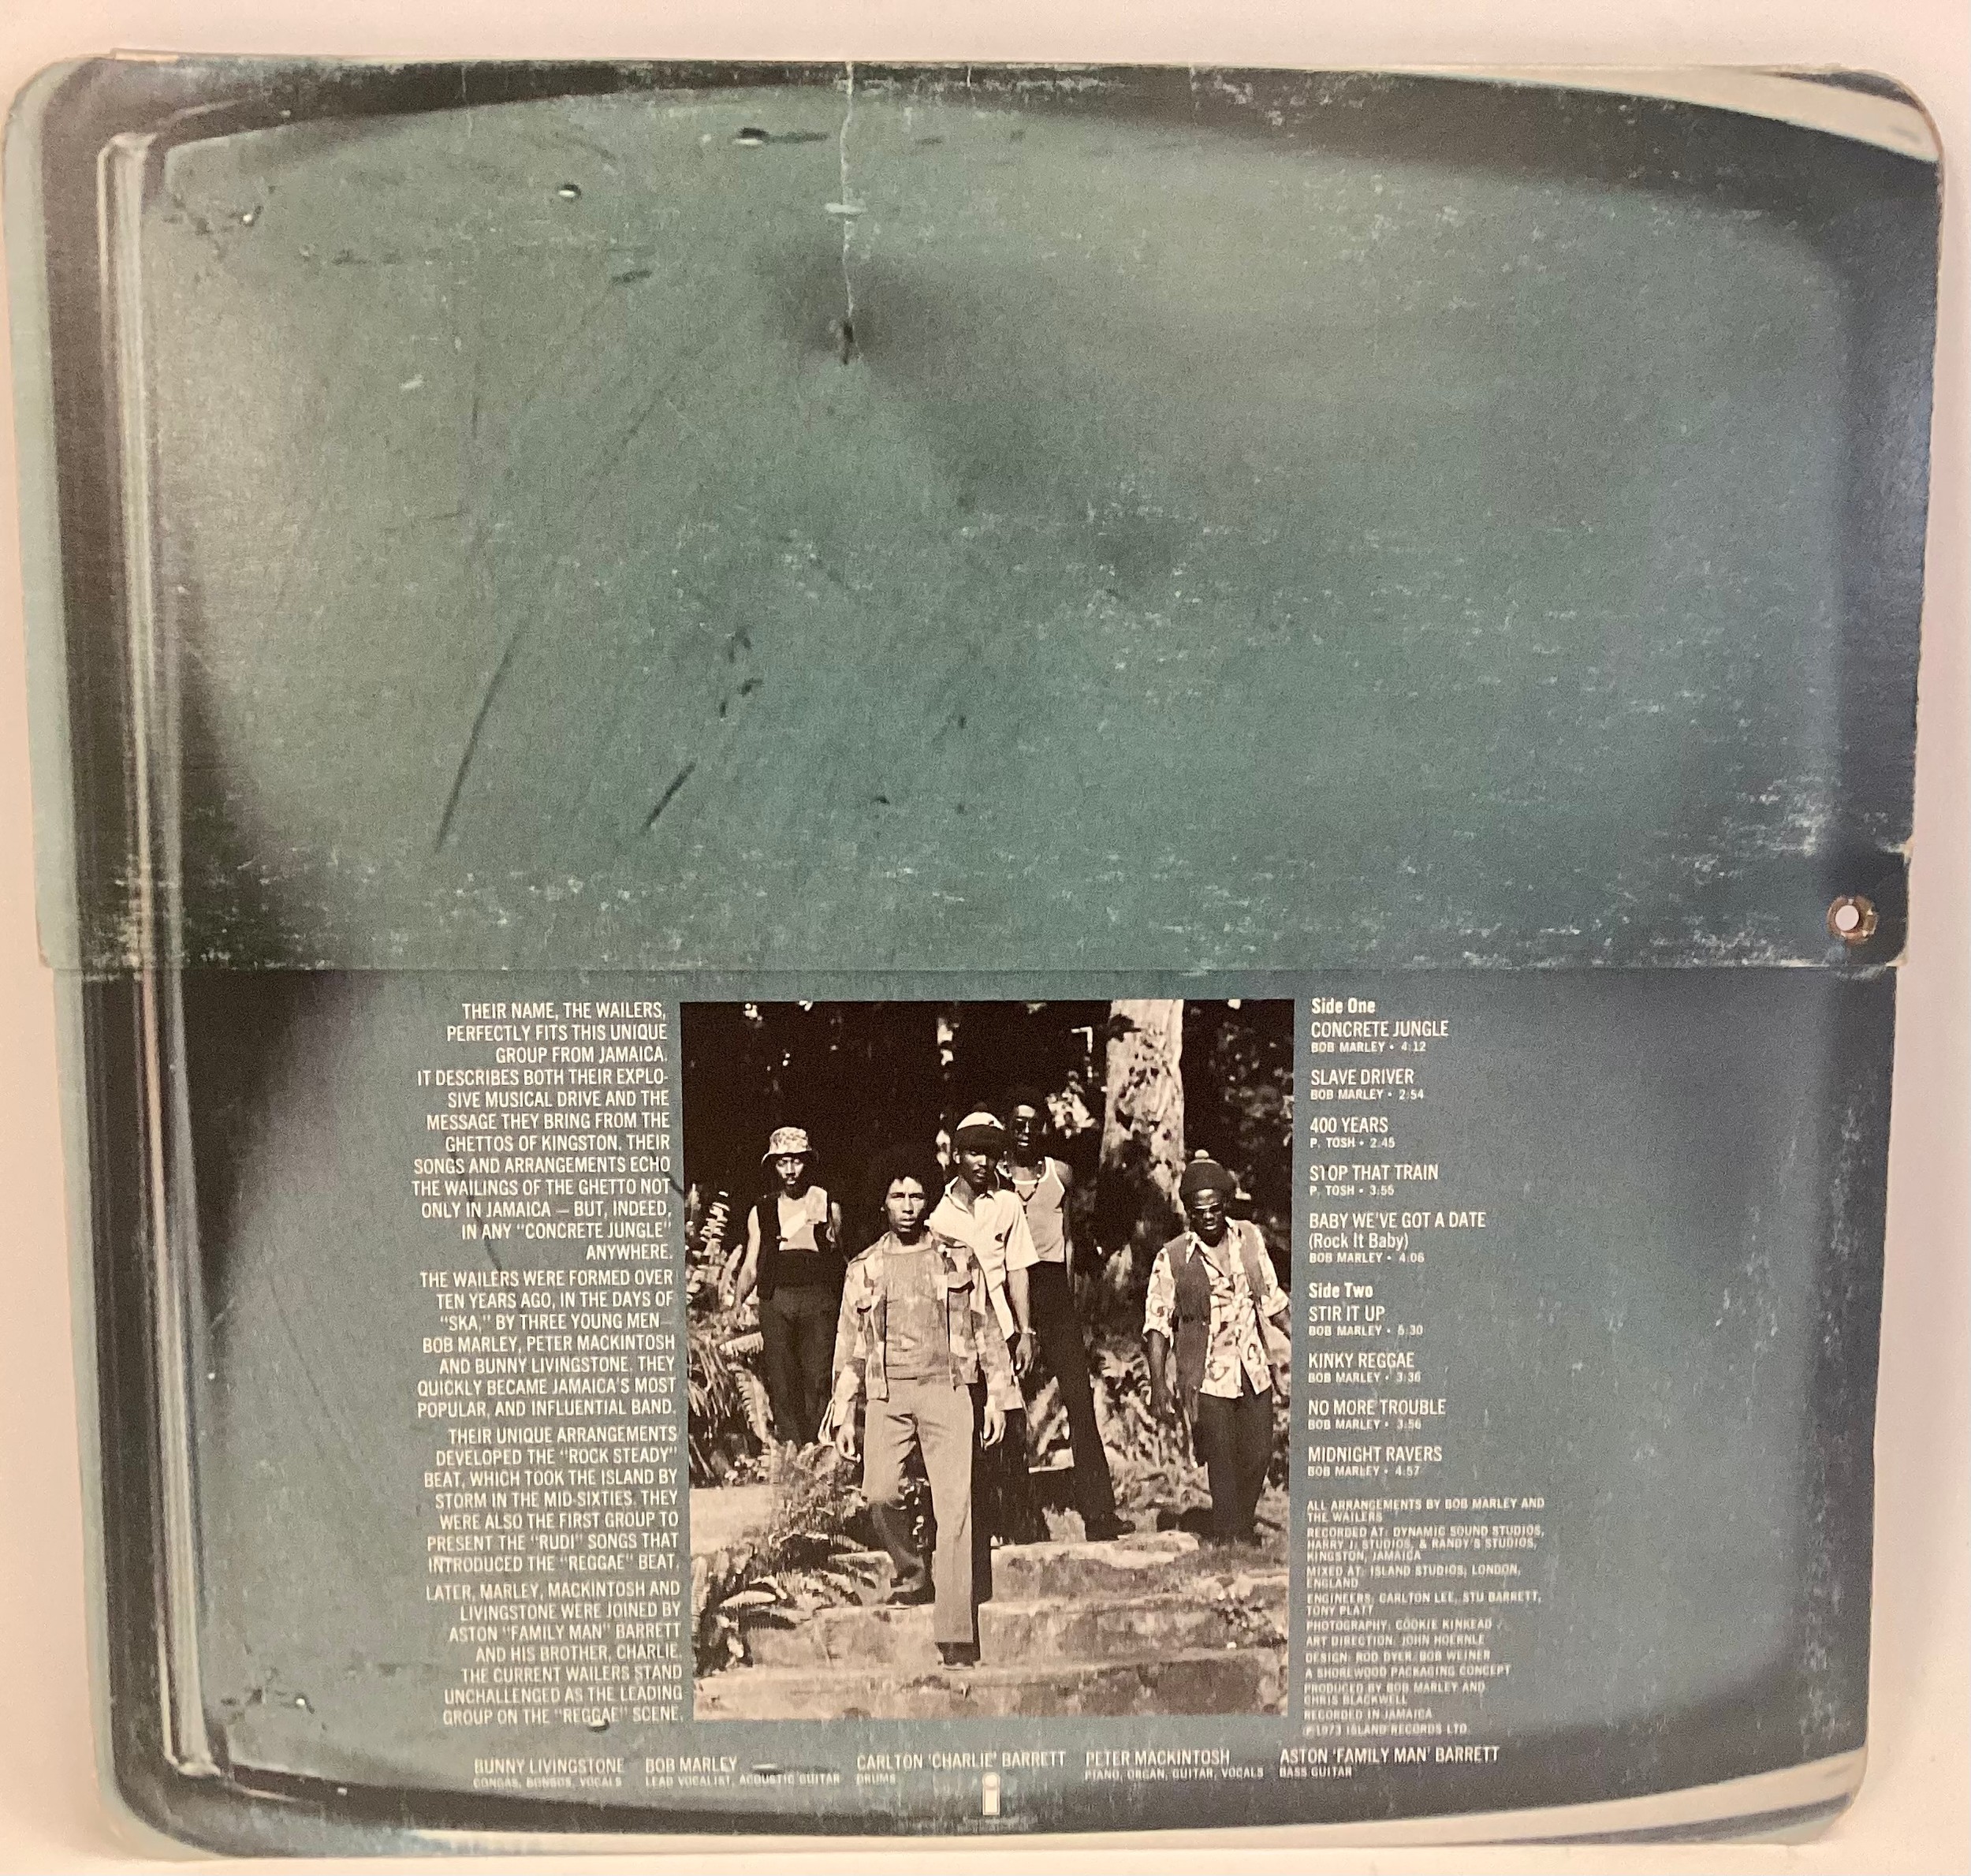 BOB MARLEY AND THE WAILERS LP ‘CATCH A FIRE’ IN RARE ZIPPO LIGHTER SLEEVE. From 1973 on Island - Image 2 of 6